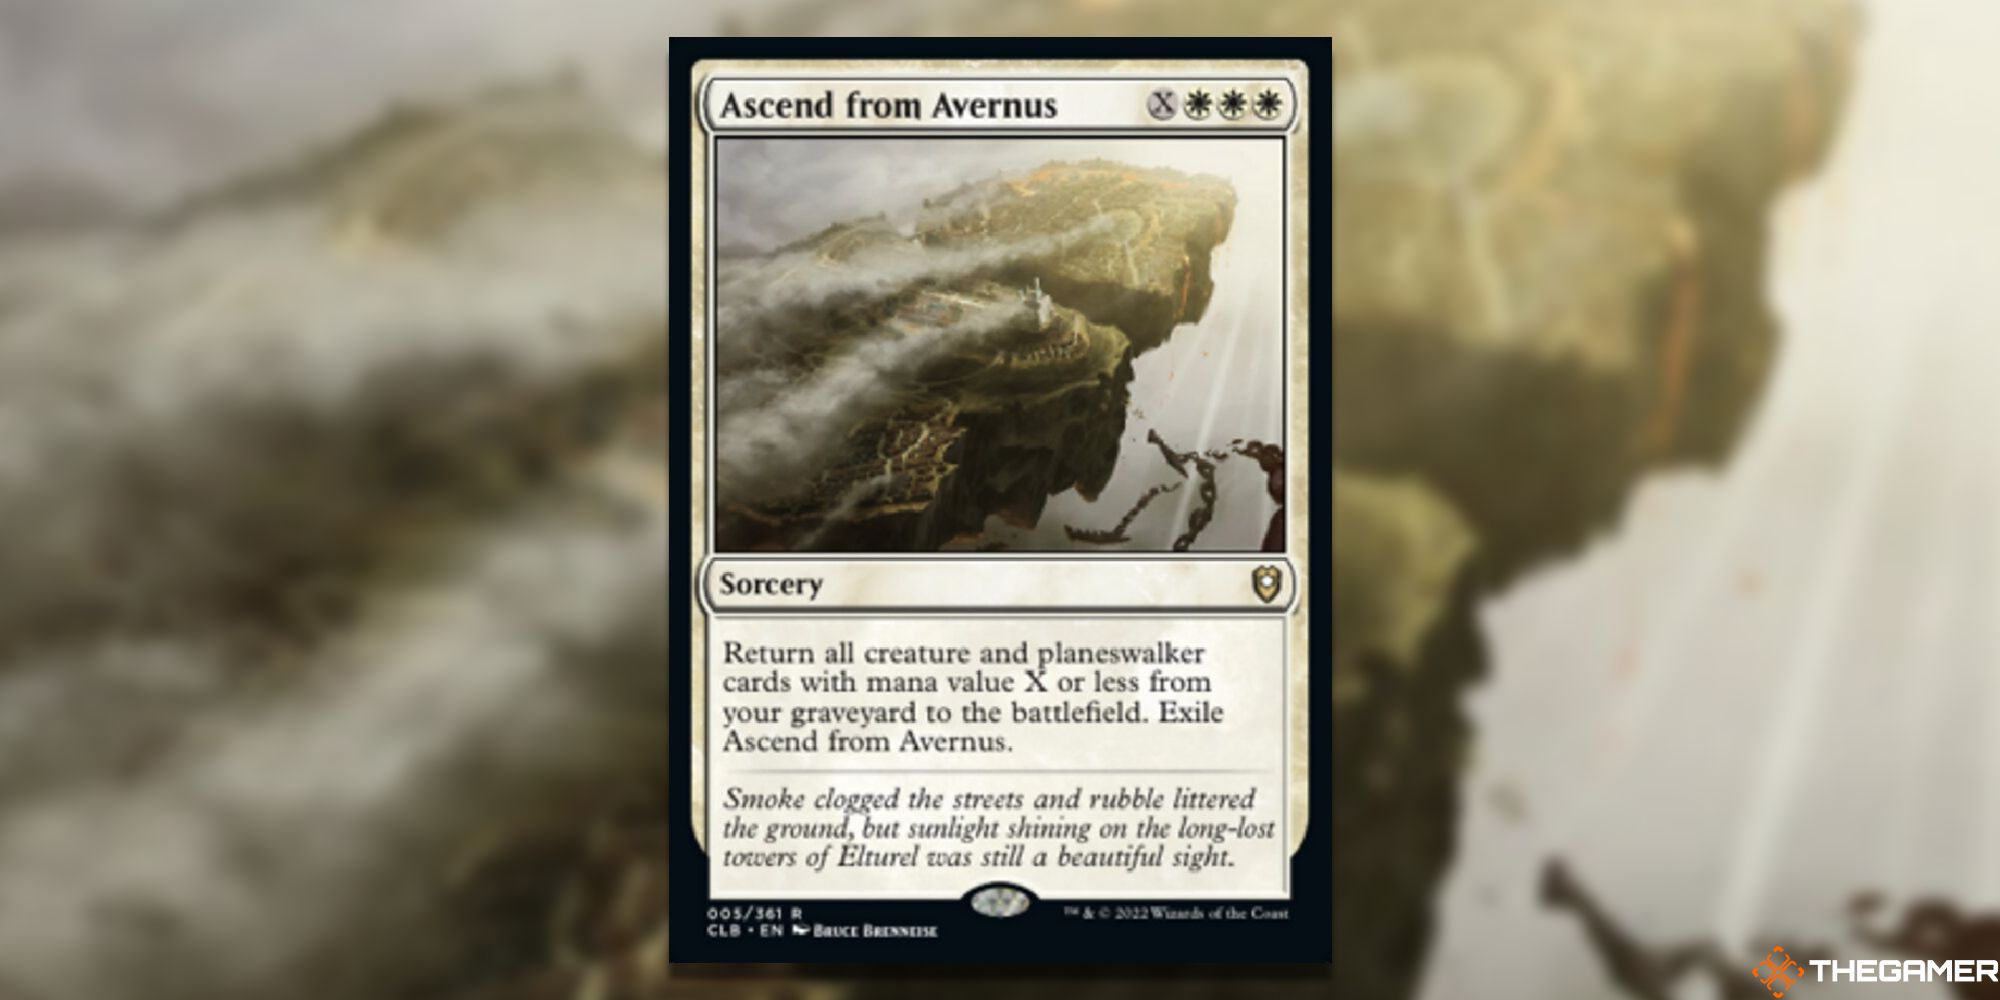 Magic: The Gathering Ascend from Avernus full card with background